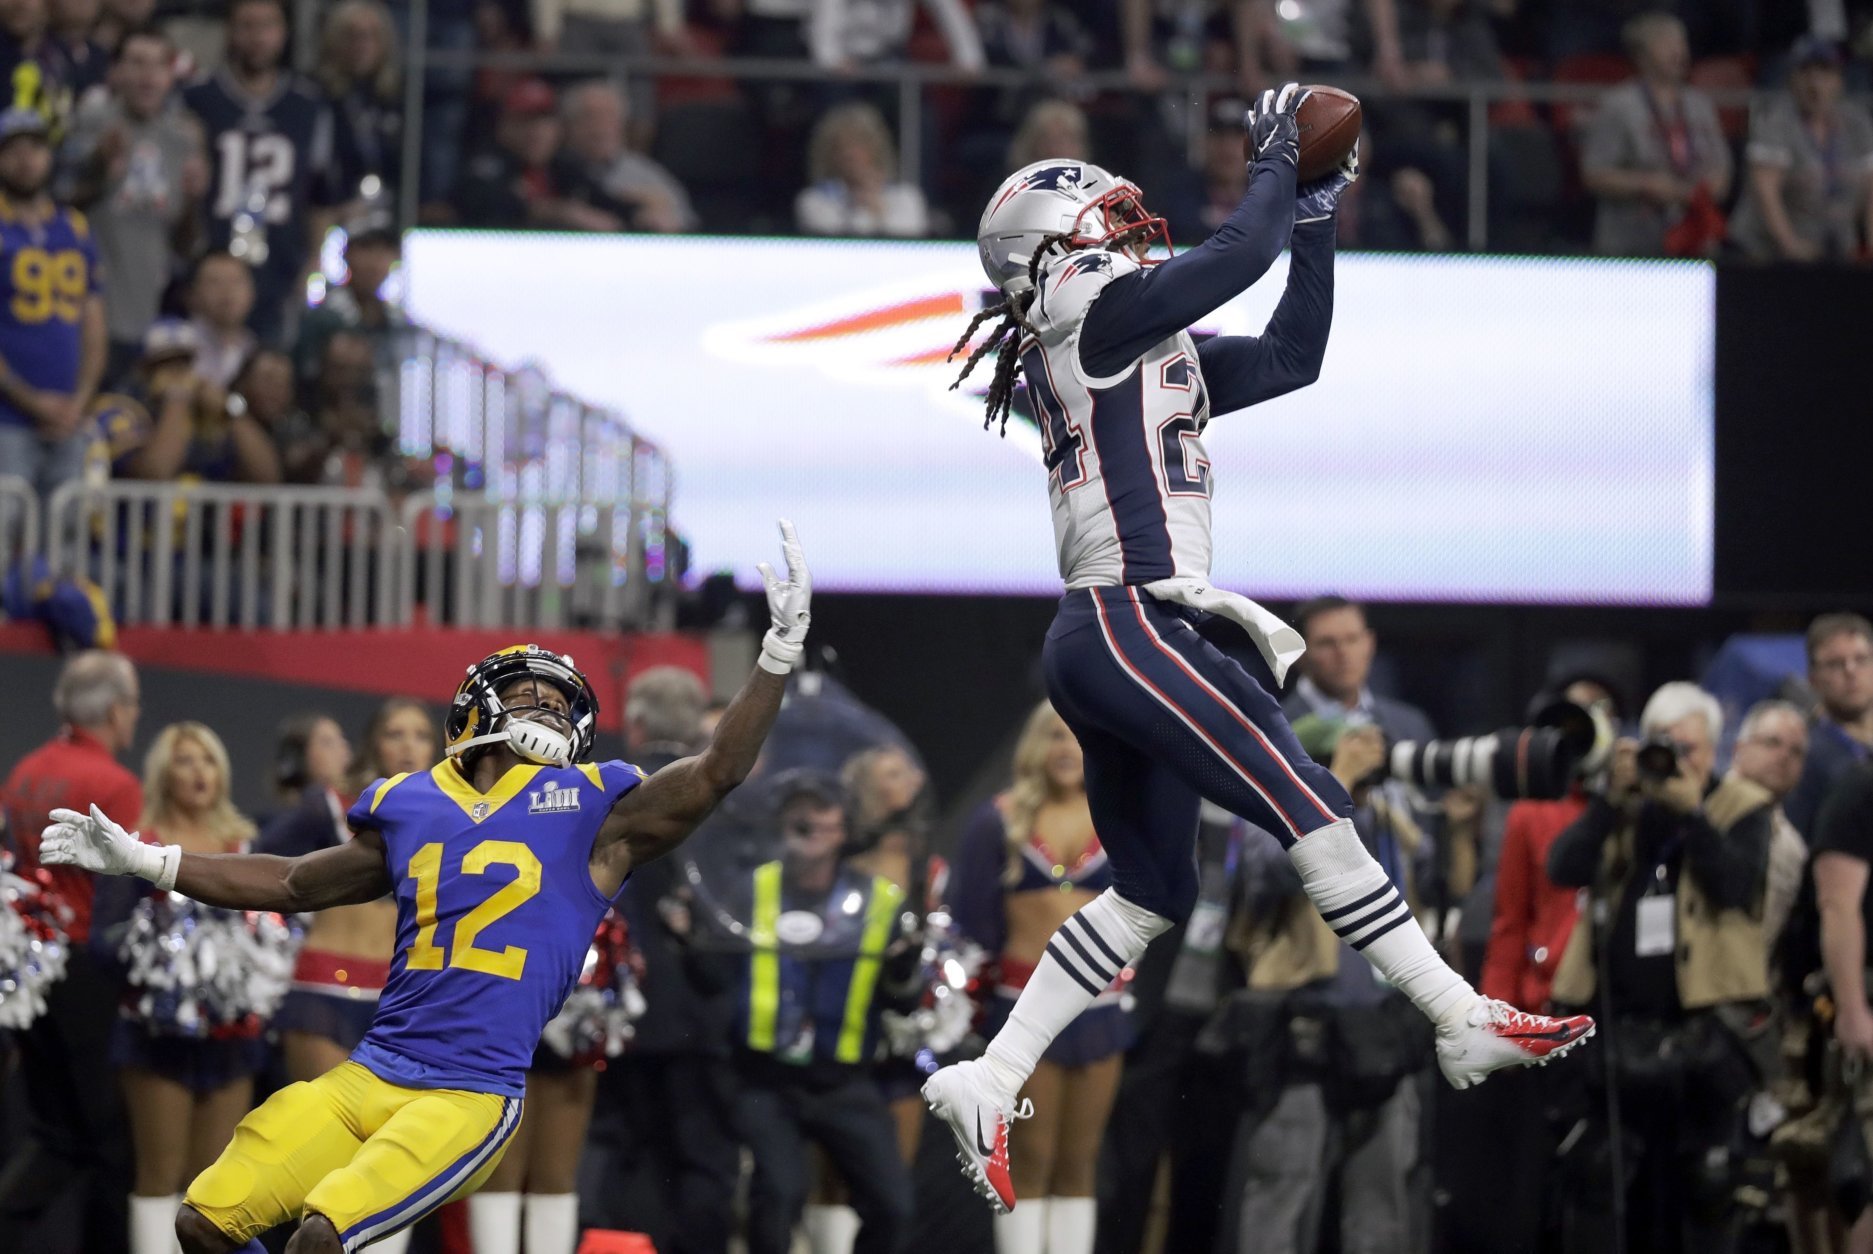 New England Patriots' Stephon Gilmore, right, intercepts a pass intended for Los Angeles Rams' Brandin Cooks (12) during the second half of the NFL Super Bowl 53 football game Sunday, Feb. 3, 2019, in Atlanta. (AP Photo/Chuck Burton)